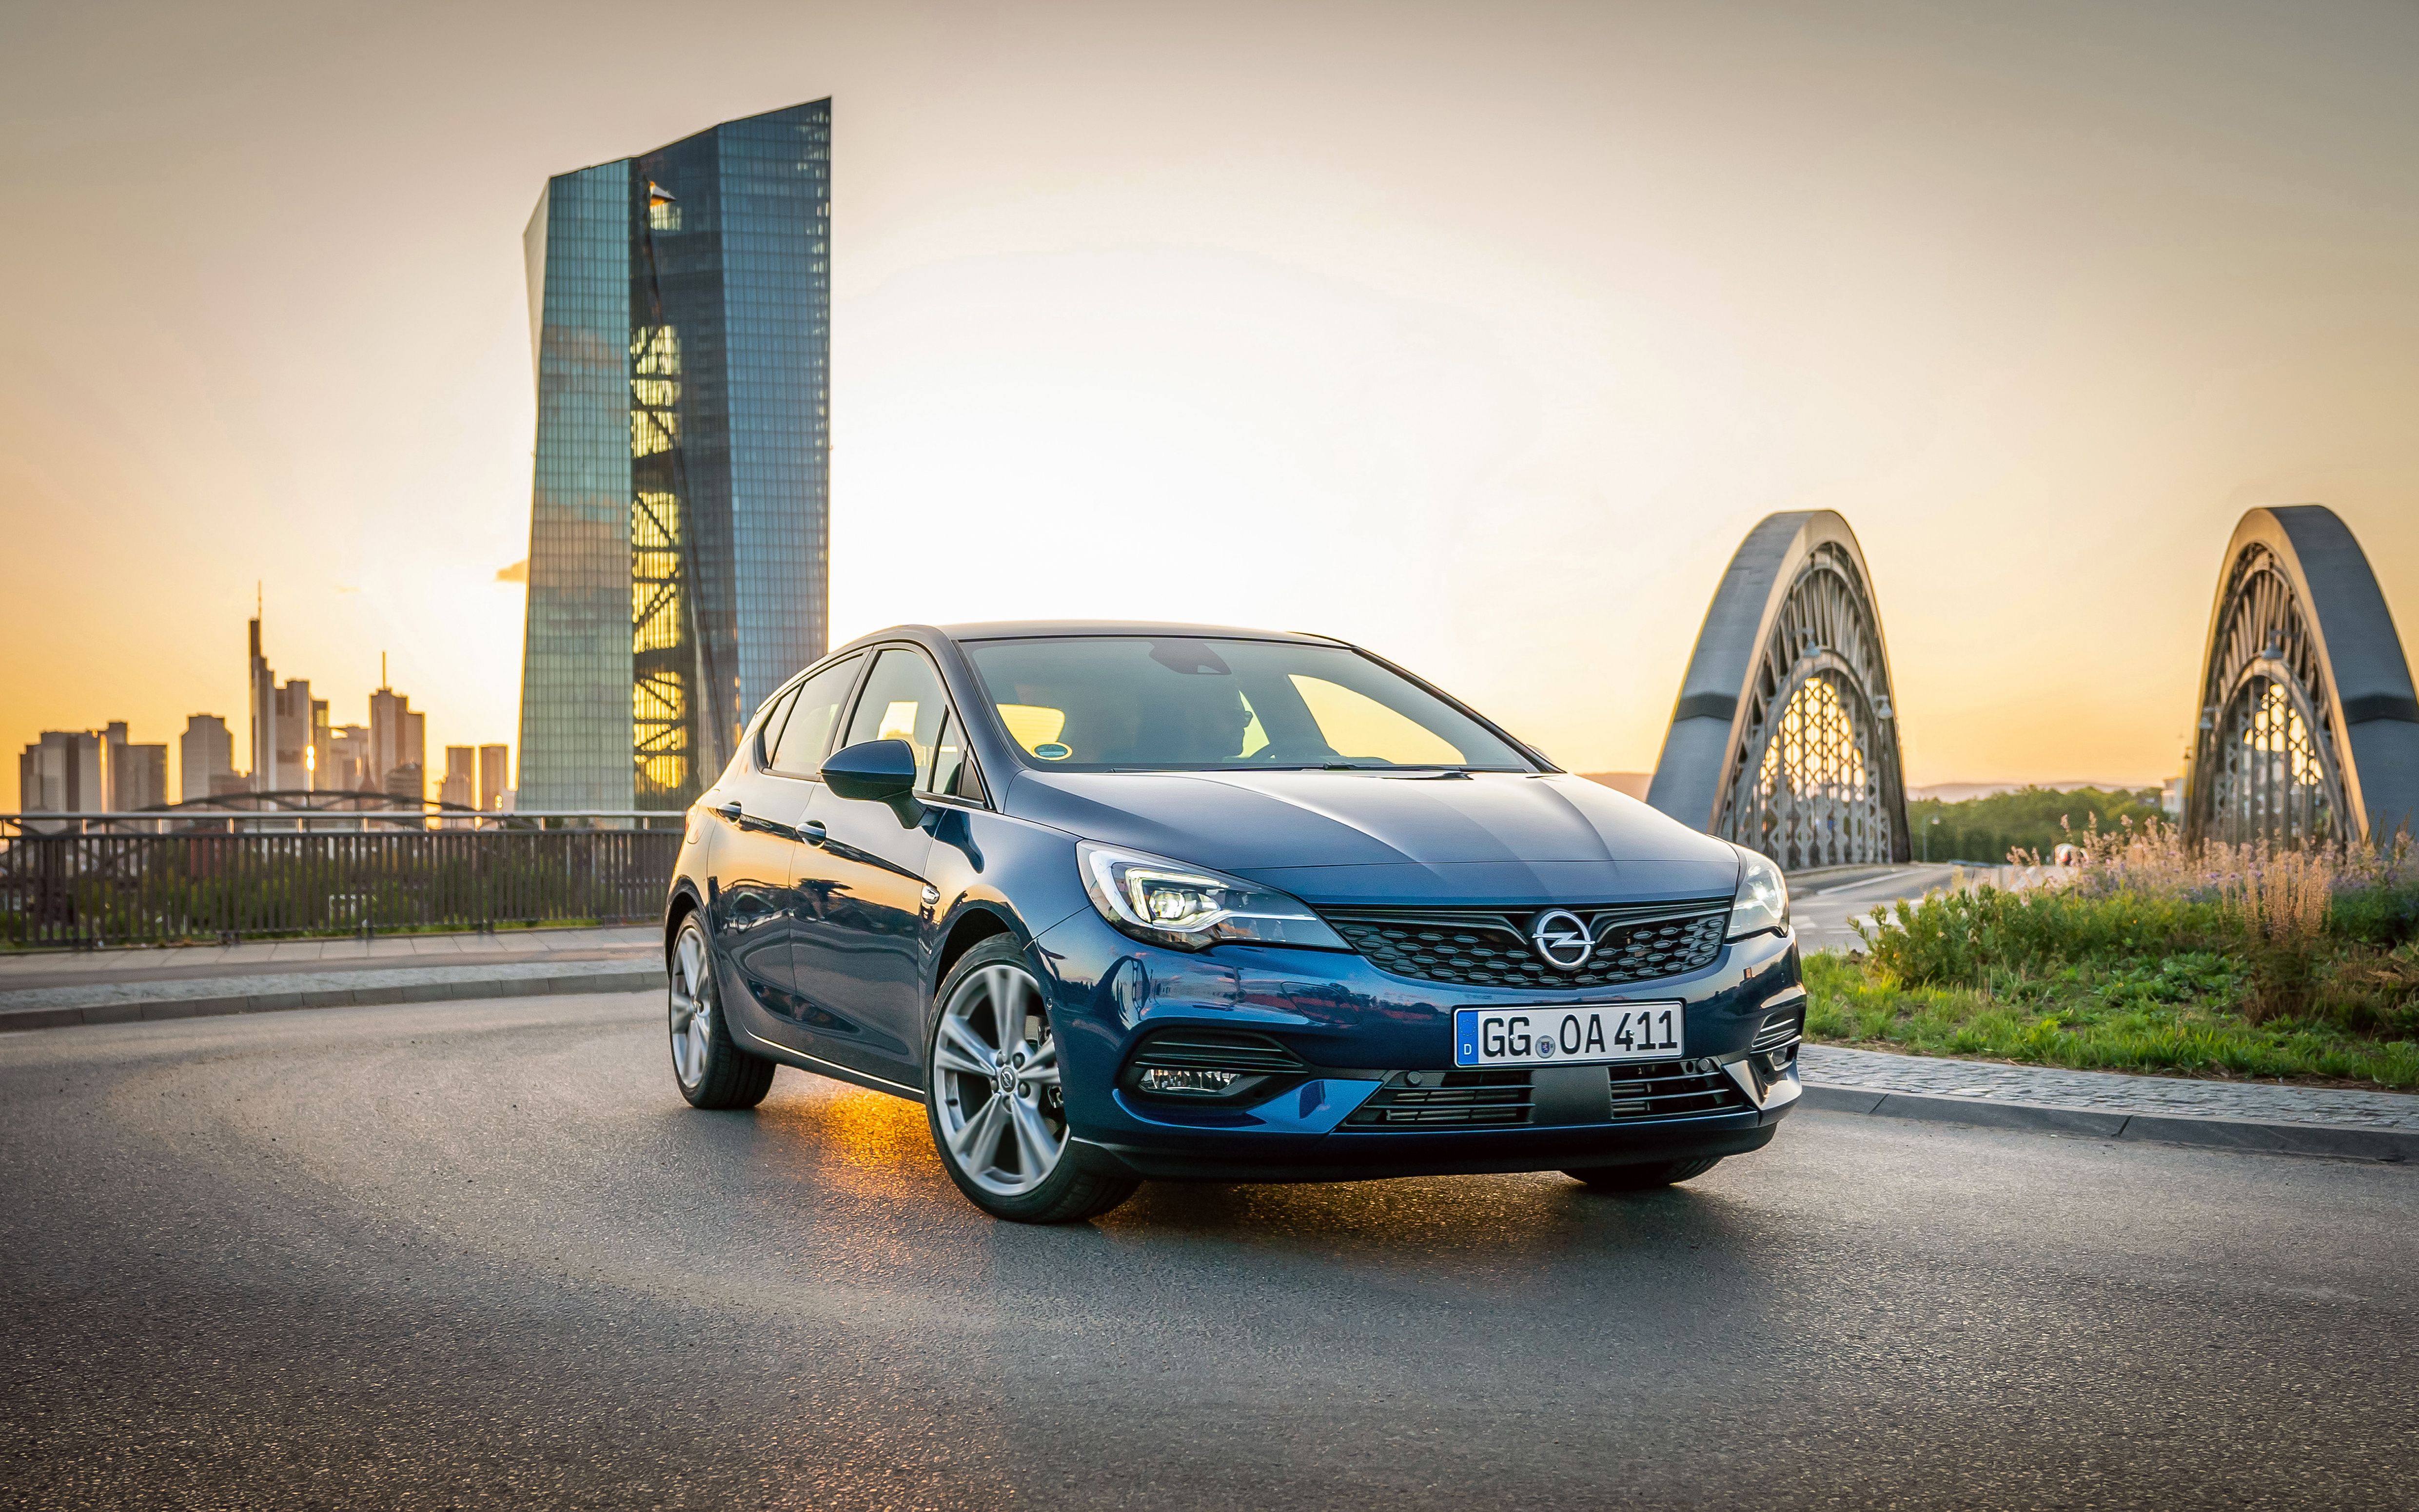 30 Years Opel Astra: Compact Bestseller and Ambassador of Change, Opel  Automobile GmbH, Story - lifePR